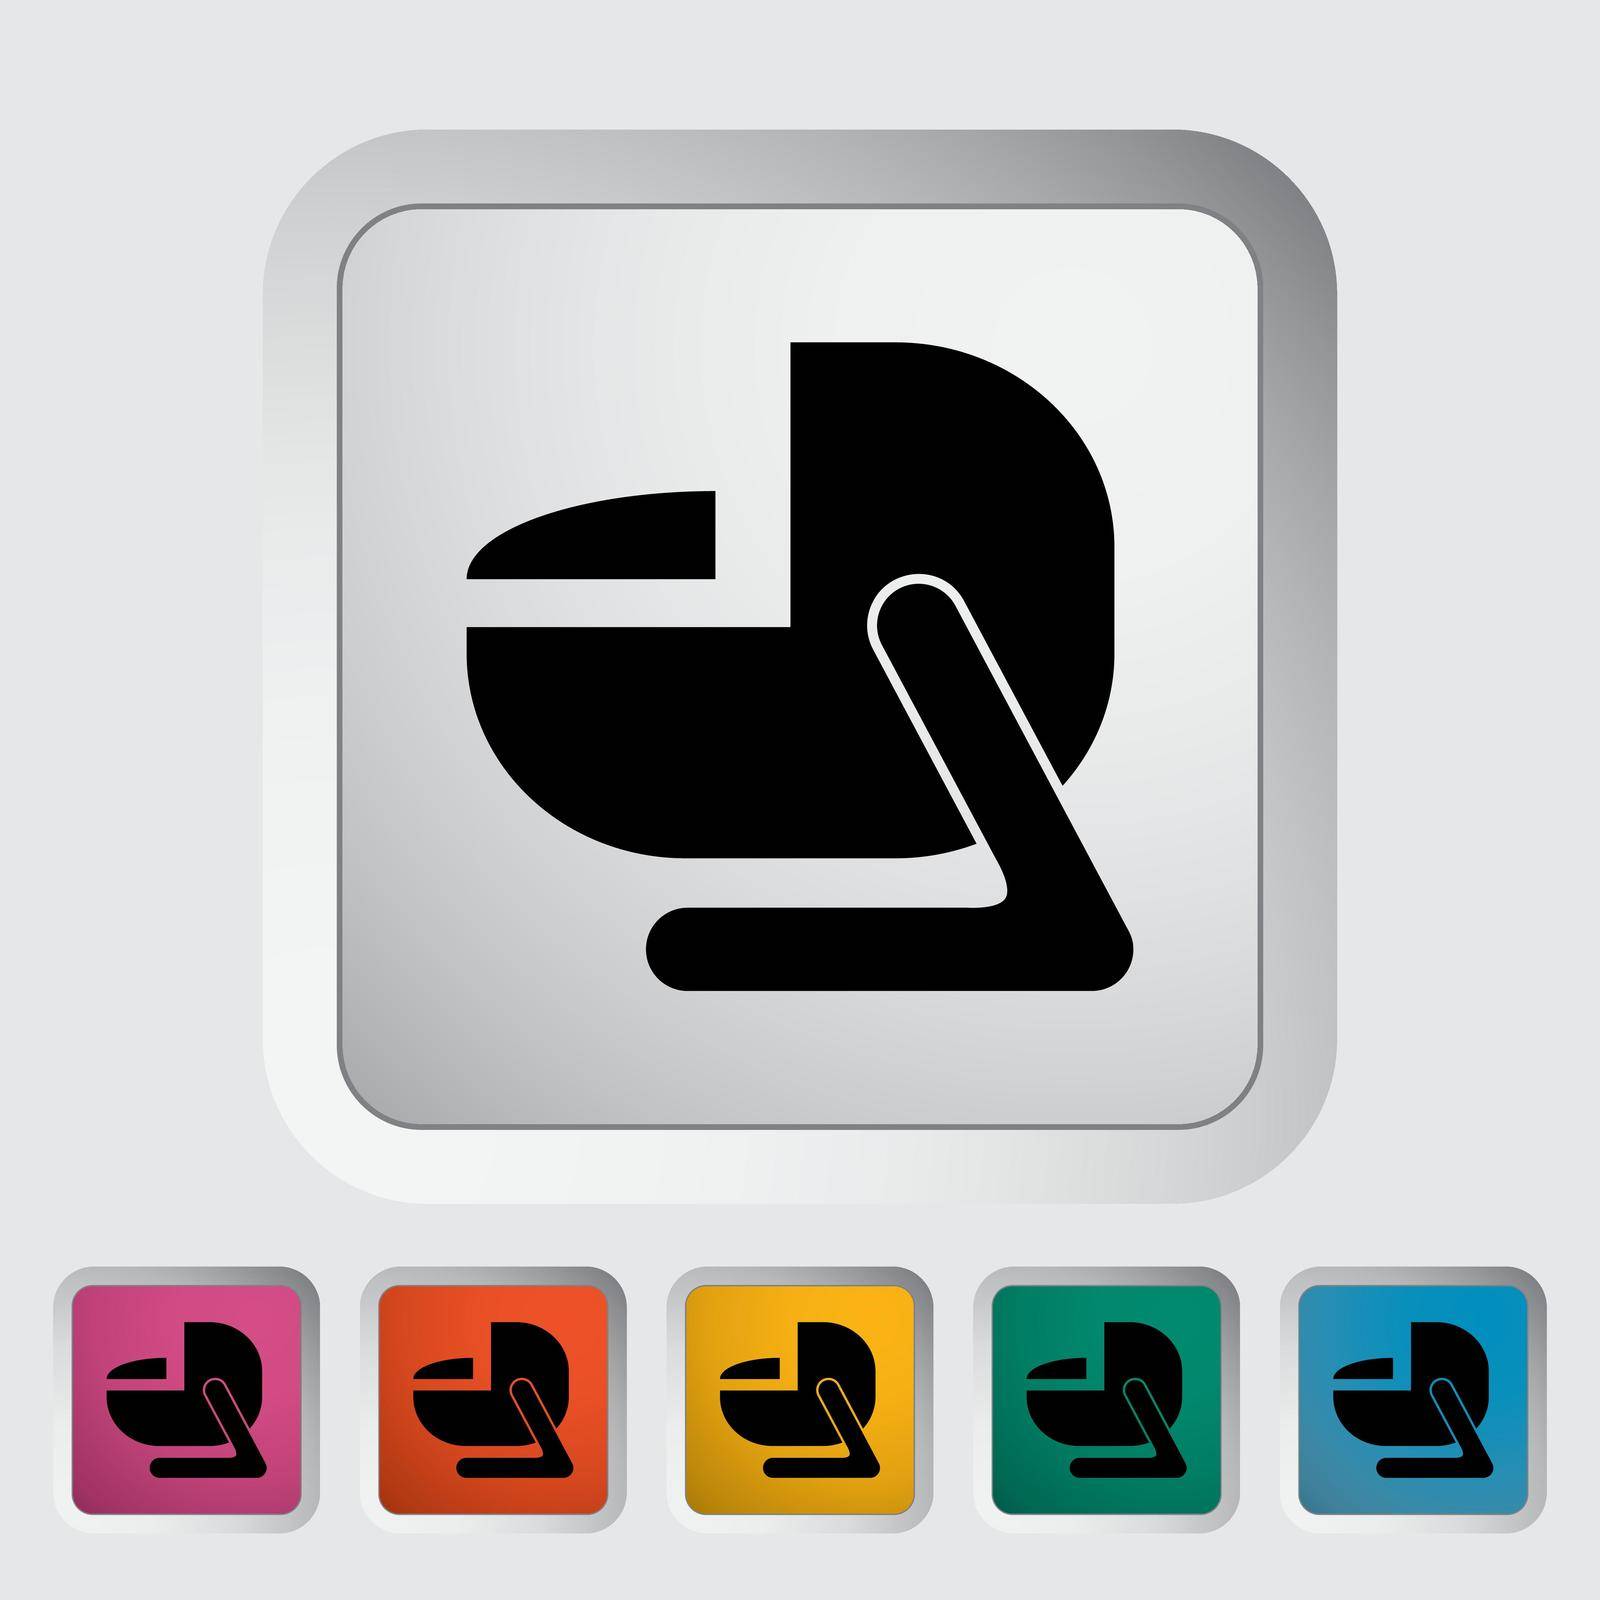 Child car seat icon. Flat vector related icon for web and mobile applications. It can be used as - logo, pictogram, icon, infographic element. Vector Illustration.